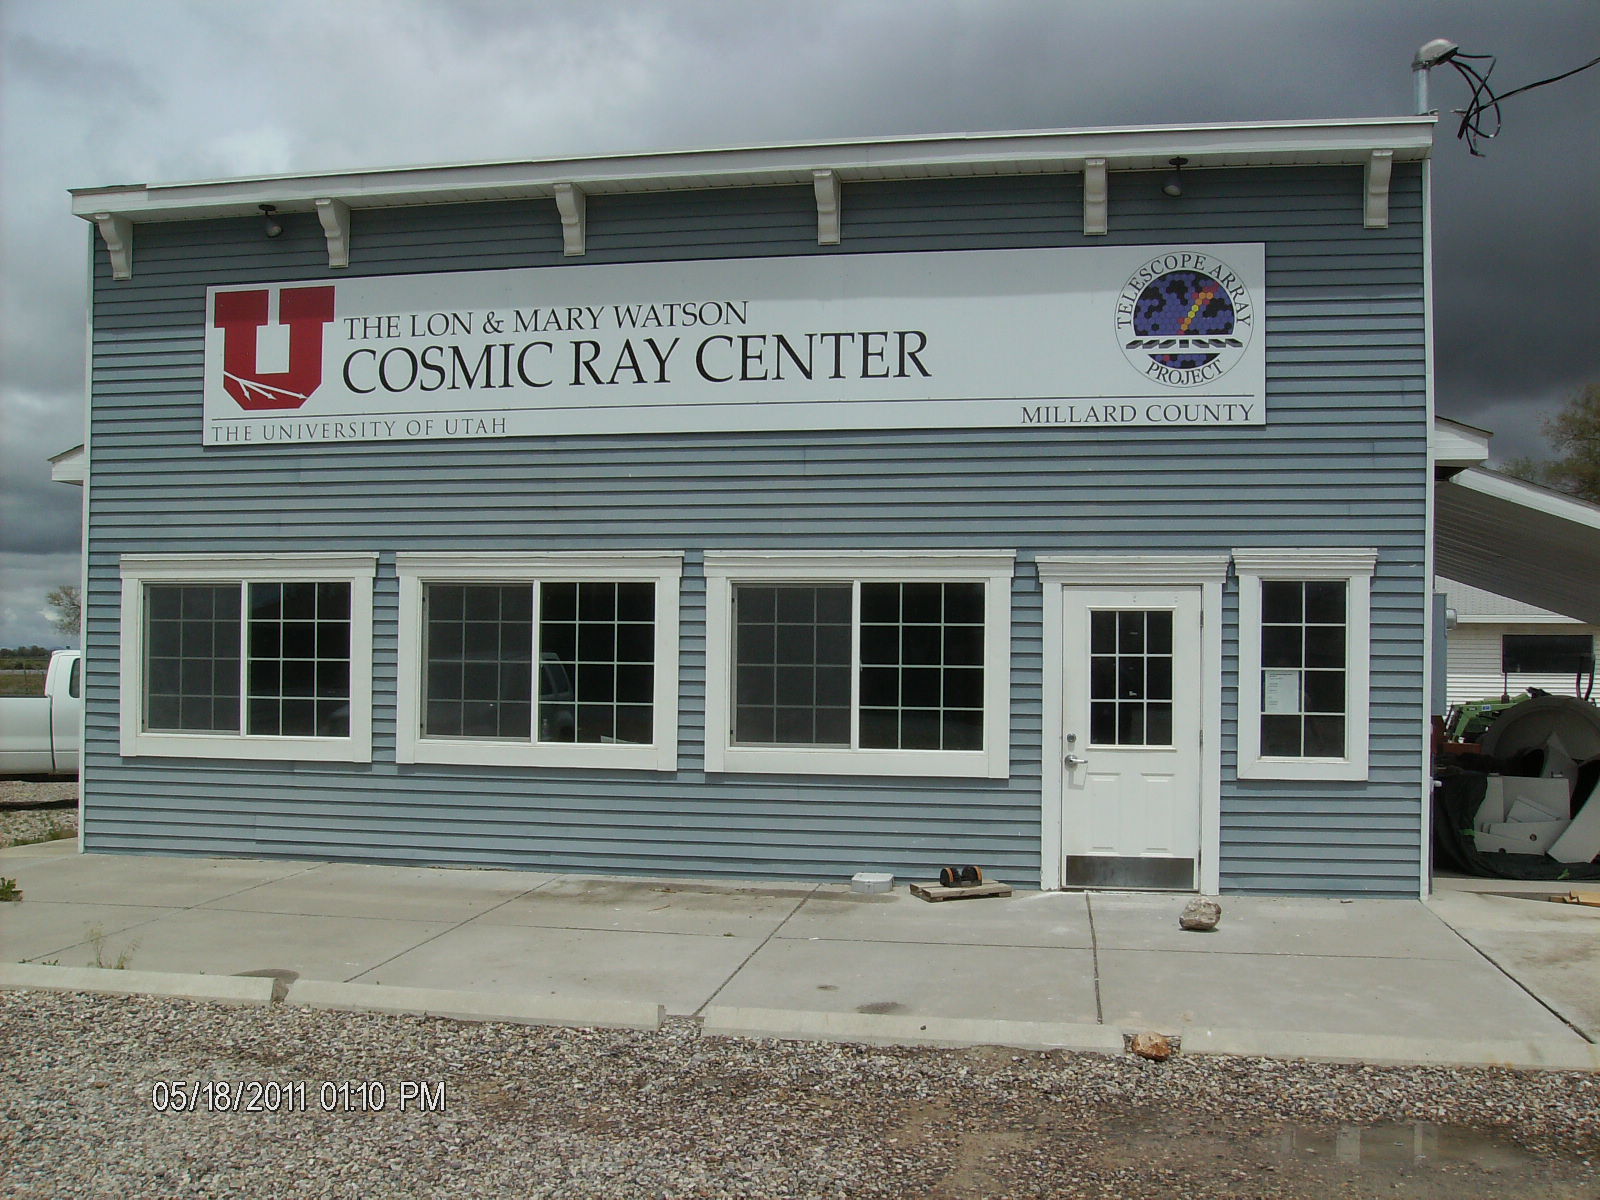 The University of Utah is opening a new Millard County Cosmic Ray Visitor Center in Delta, Utah, inside the existing Lon and Mary Watson Cosmic Ray Center, which is the hub of operations for the nearby Telescope Array, a cosmic ray observatory spread across the desert west of delta.